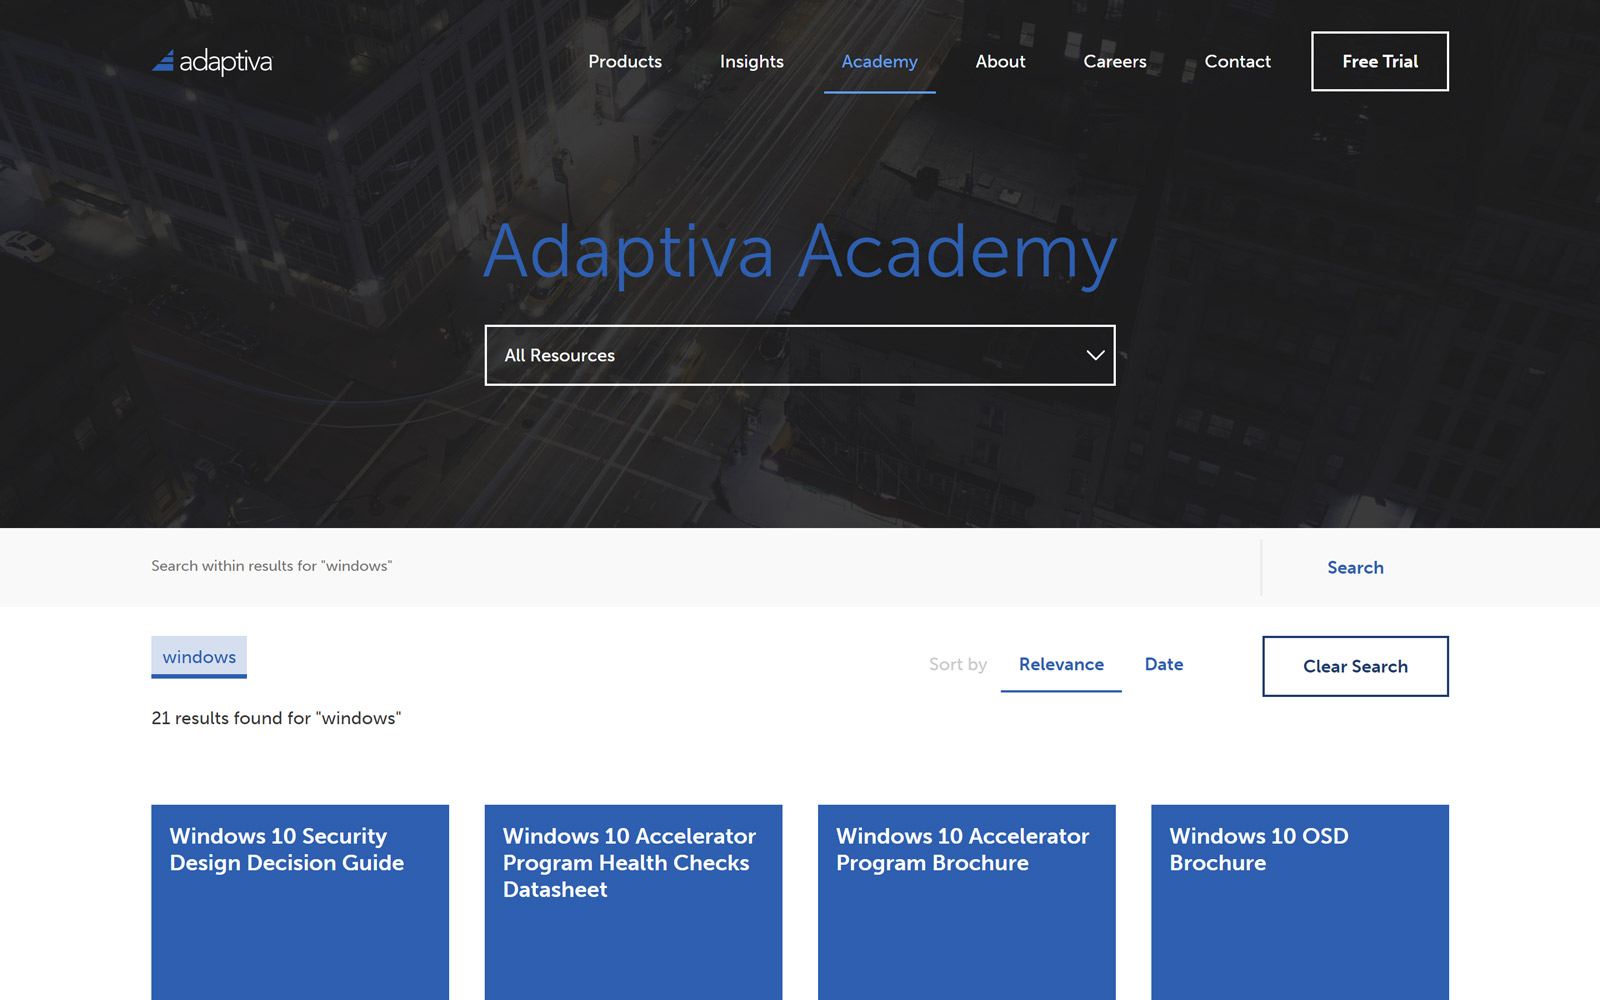 UI design for Adaptiva Academy search feature